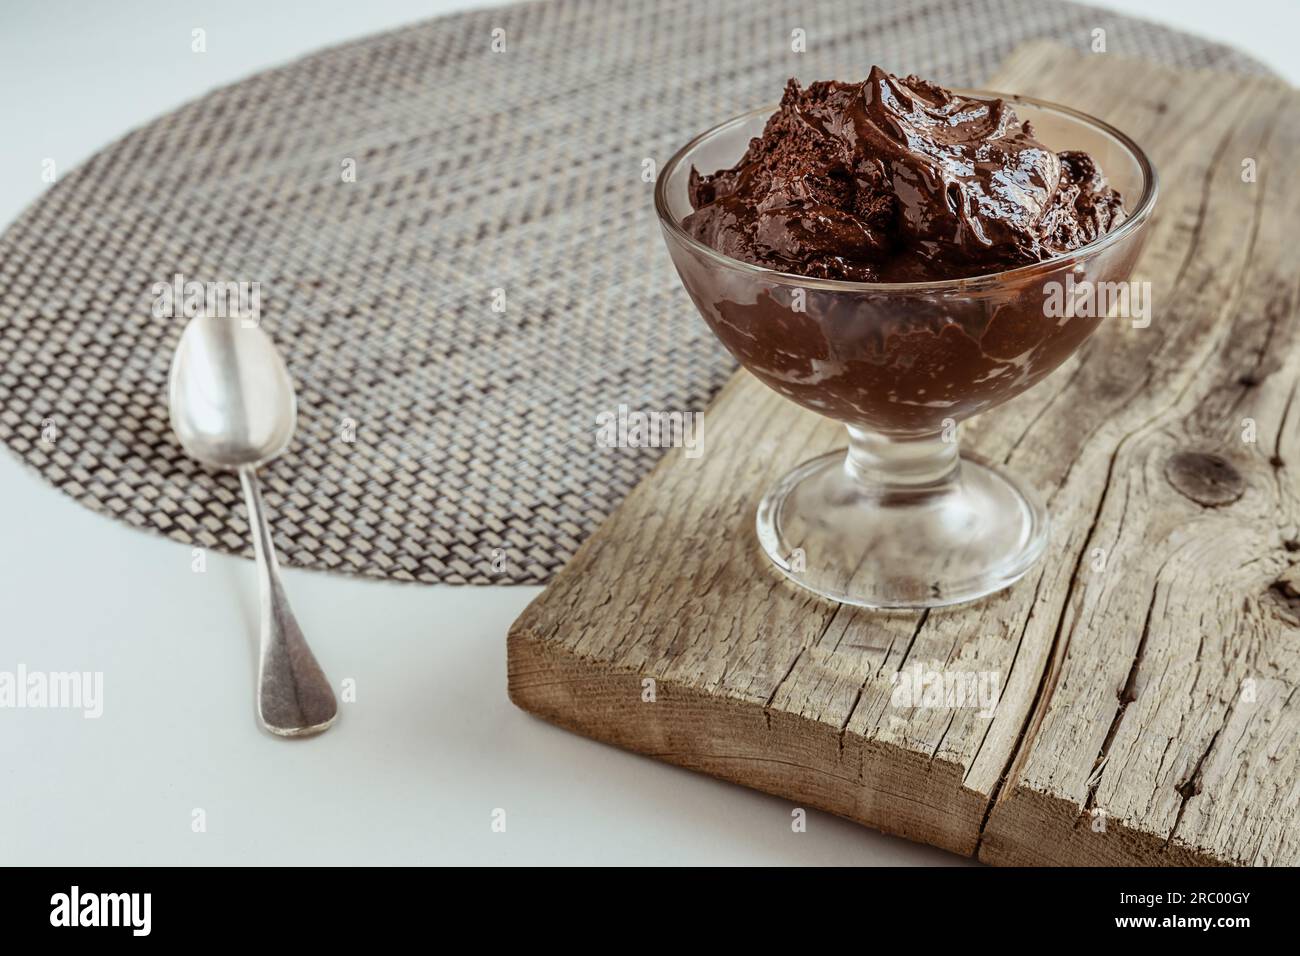 A transparent bowl with chocolate mousse, traditional French dessert on a wooden board Stock Photo